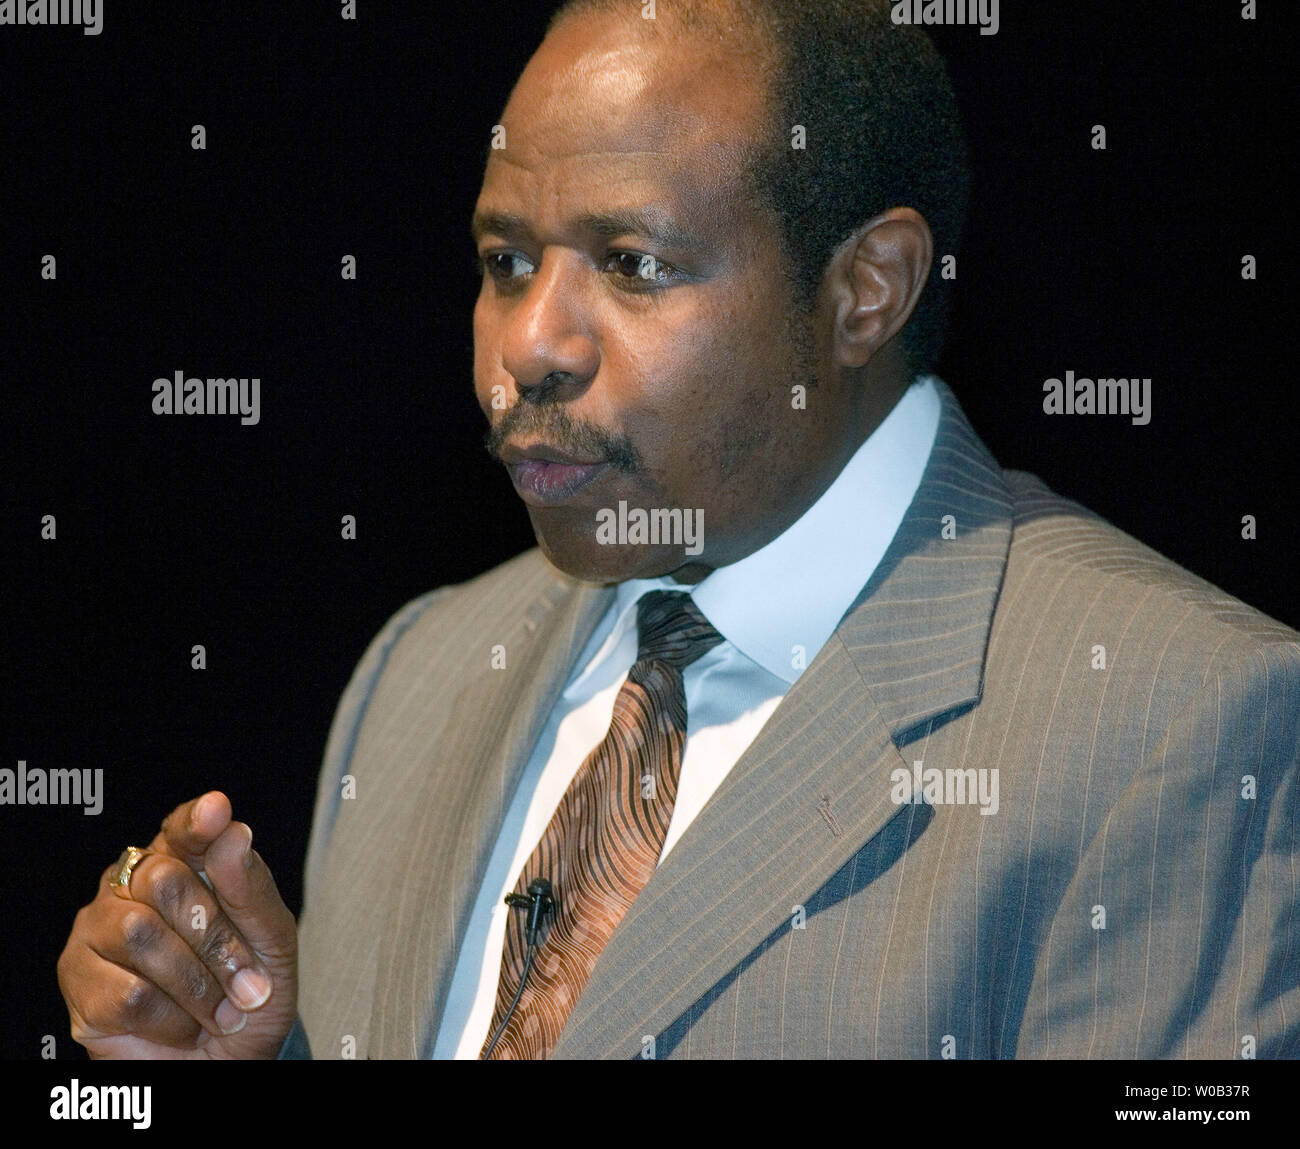 Paul Rusesabagina the real-life inspiration for last years  Academy Award-nominated film, 'Hotel Rwanda' gives a lecture at Vancouver's University of of British Columbia, Chan Center, January 8, 2006. A Hutu, Rusesabagina saved hundreds of Tutsis from genocide during Rwanda's civil war by sheltering them in the upscale hotel he worked for. (UPI Photo/Heinz Ruckemann) Stock Photo